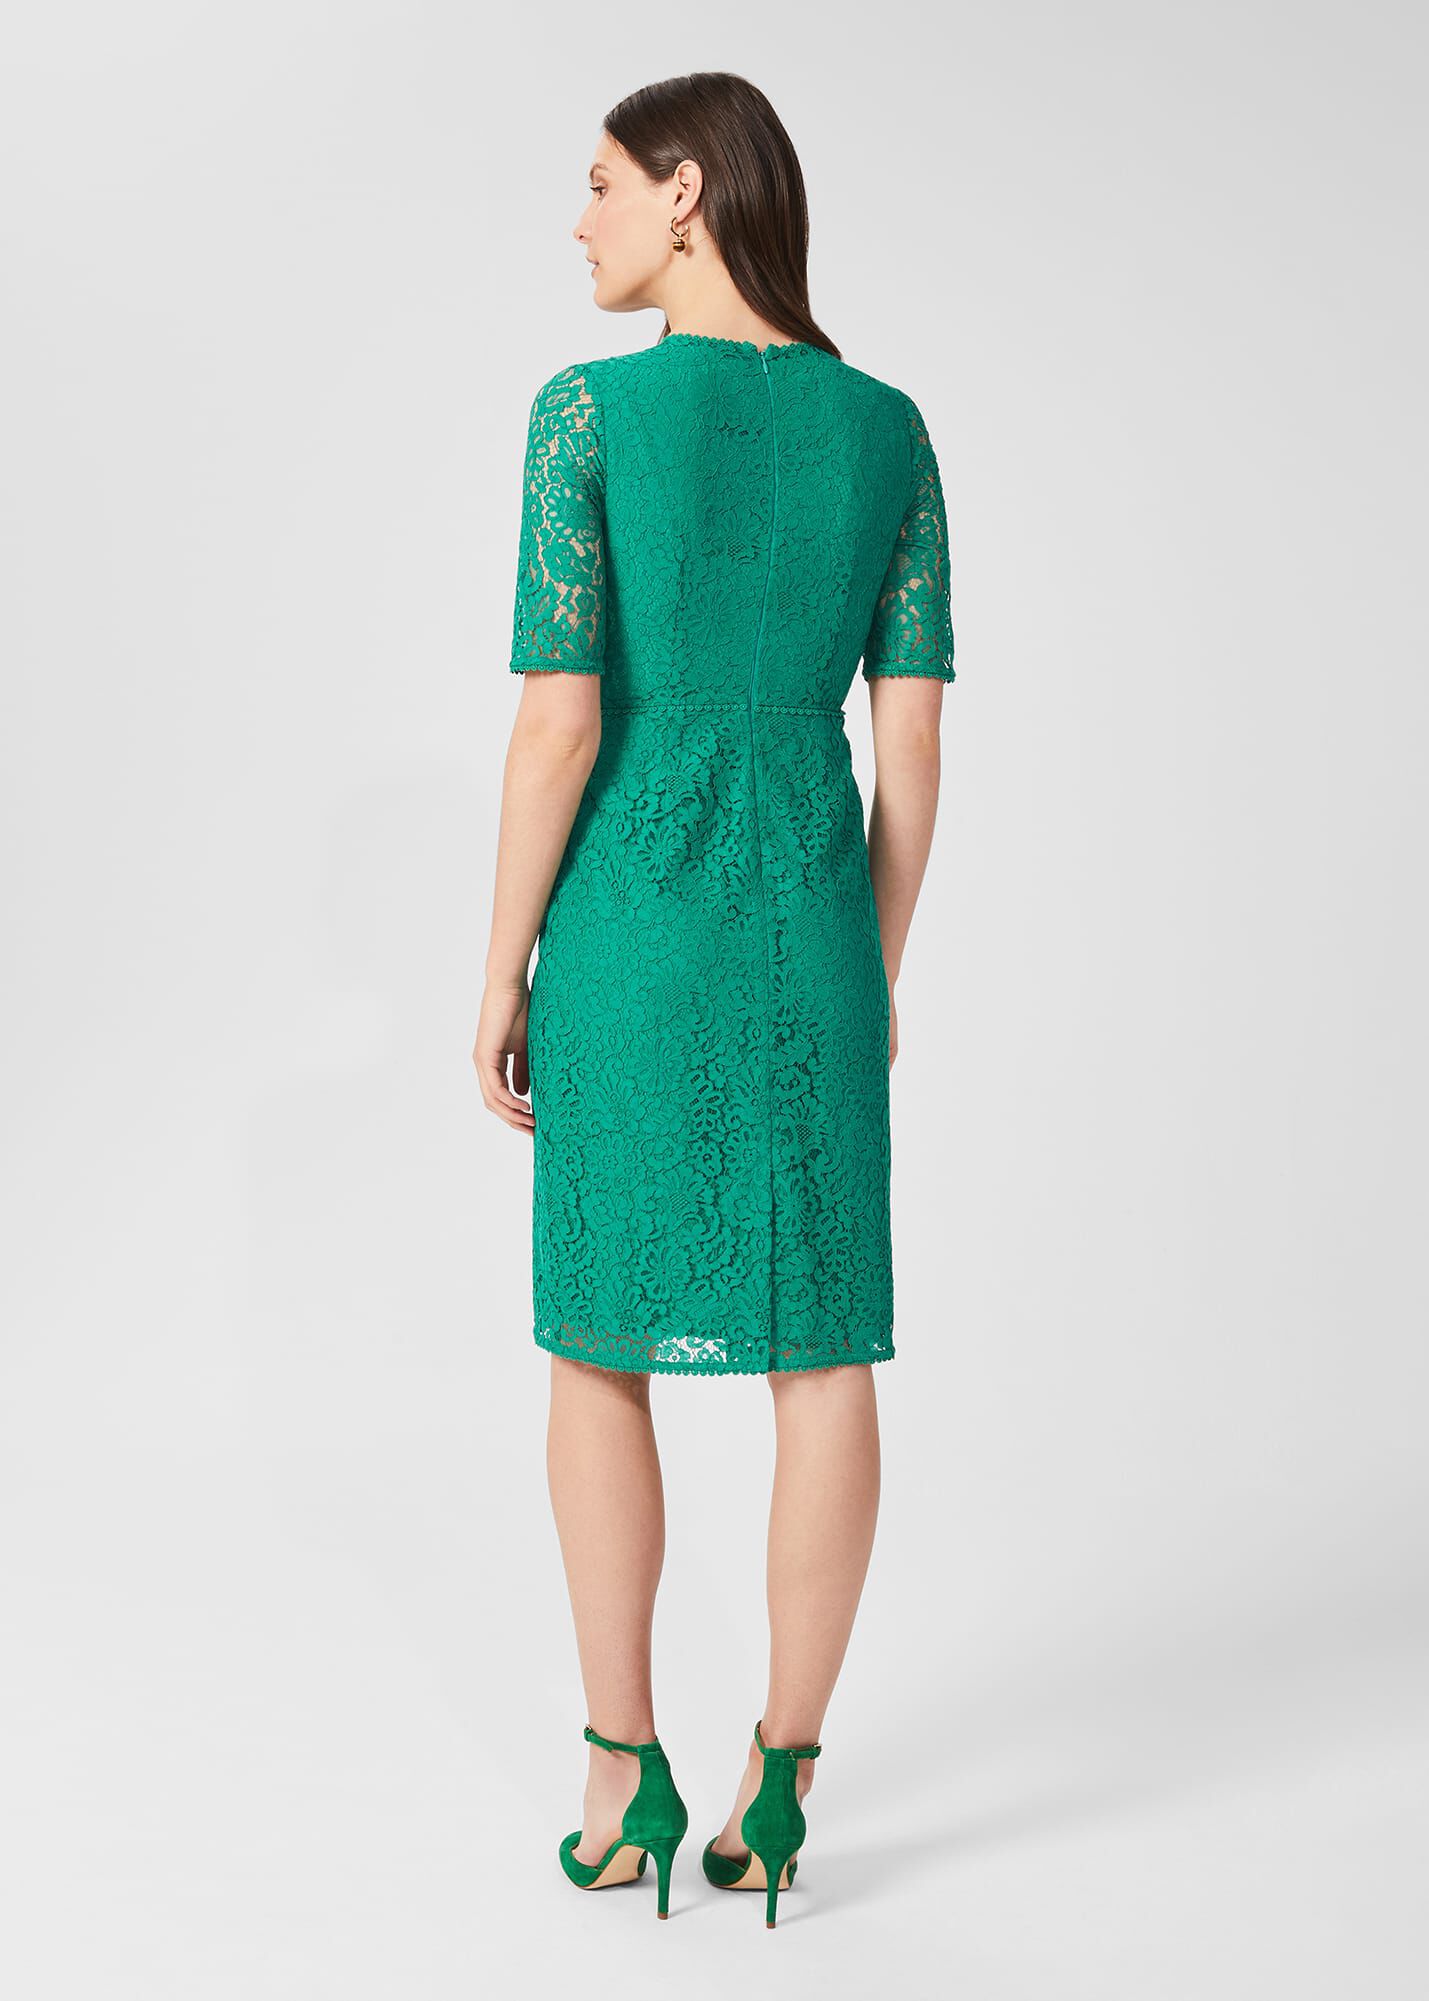 Womens Clothing Dresses Cocktail and party dresses Save 46% Hobbs Penny Lace Shift Dress in Green 